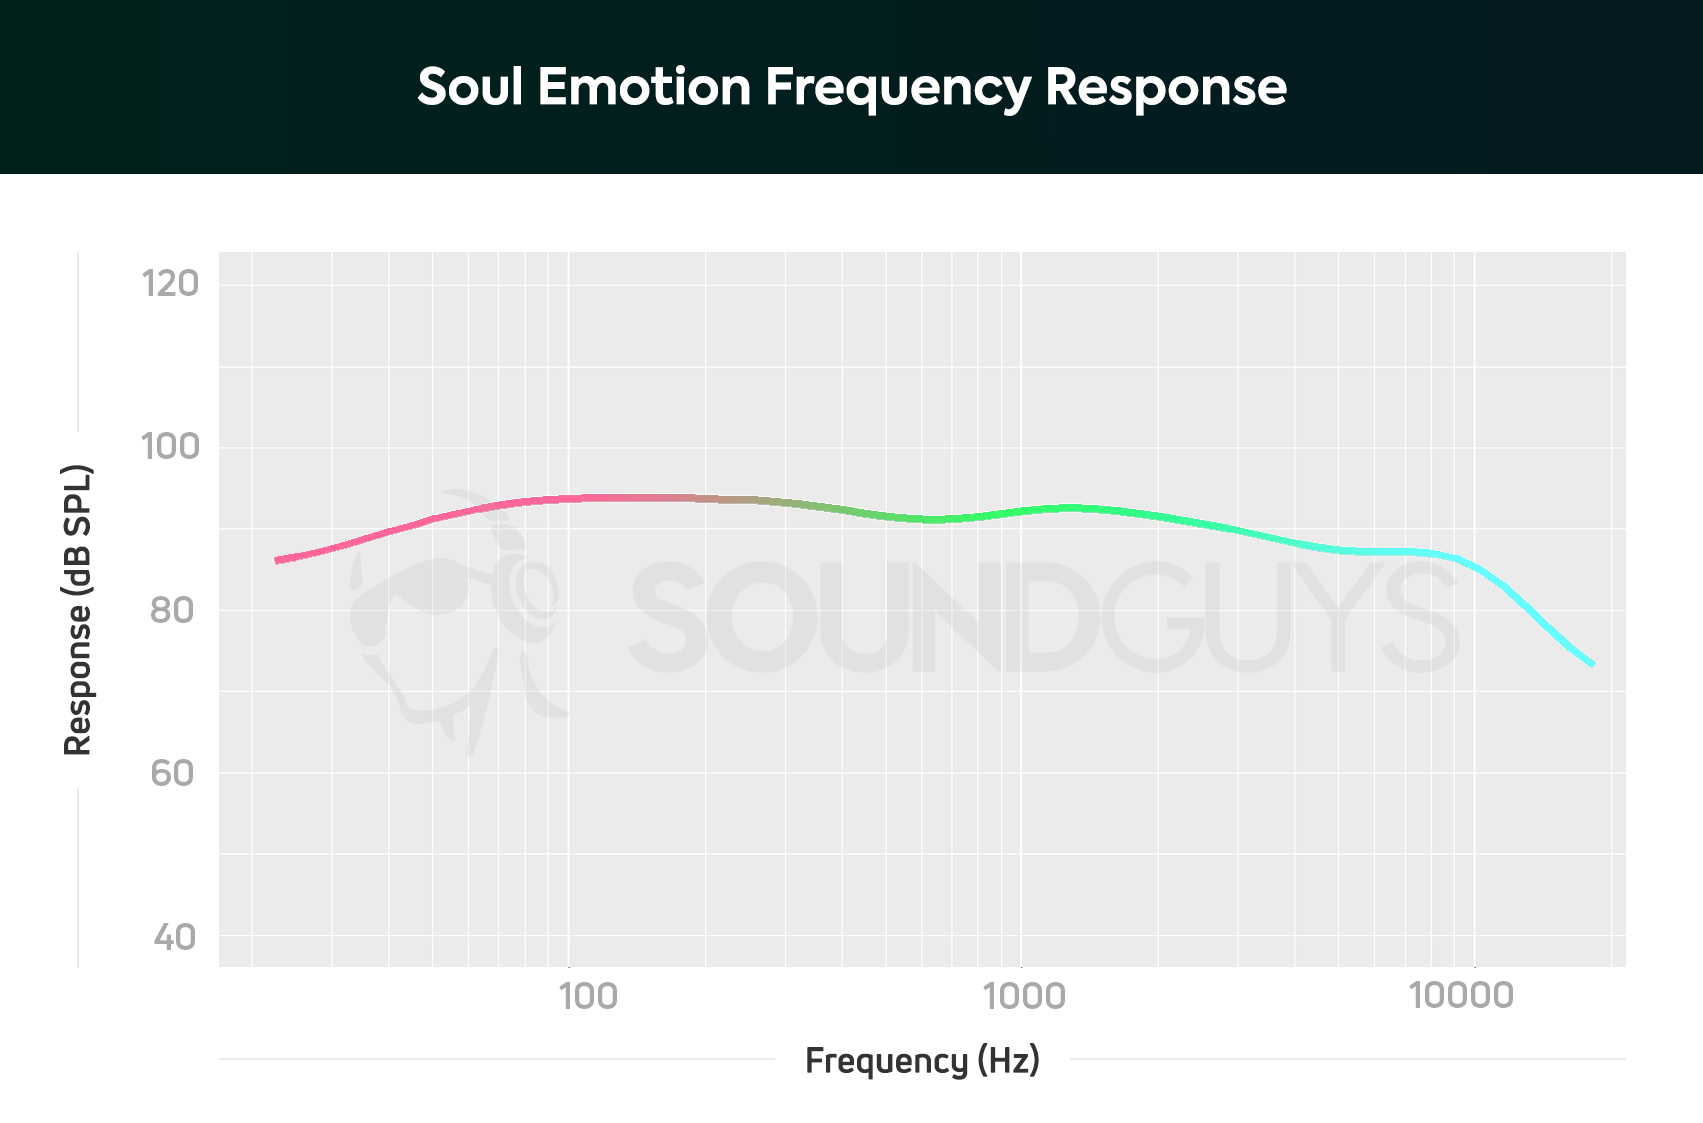 Soul Emotion: Frequency response chart reveals a boosted low-end and midrange with under emphasized treble.